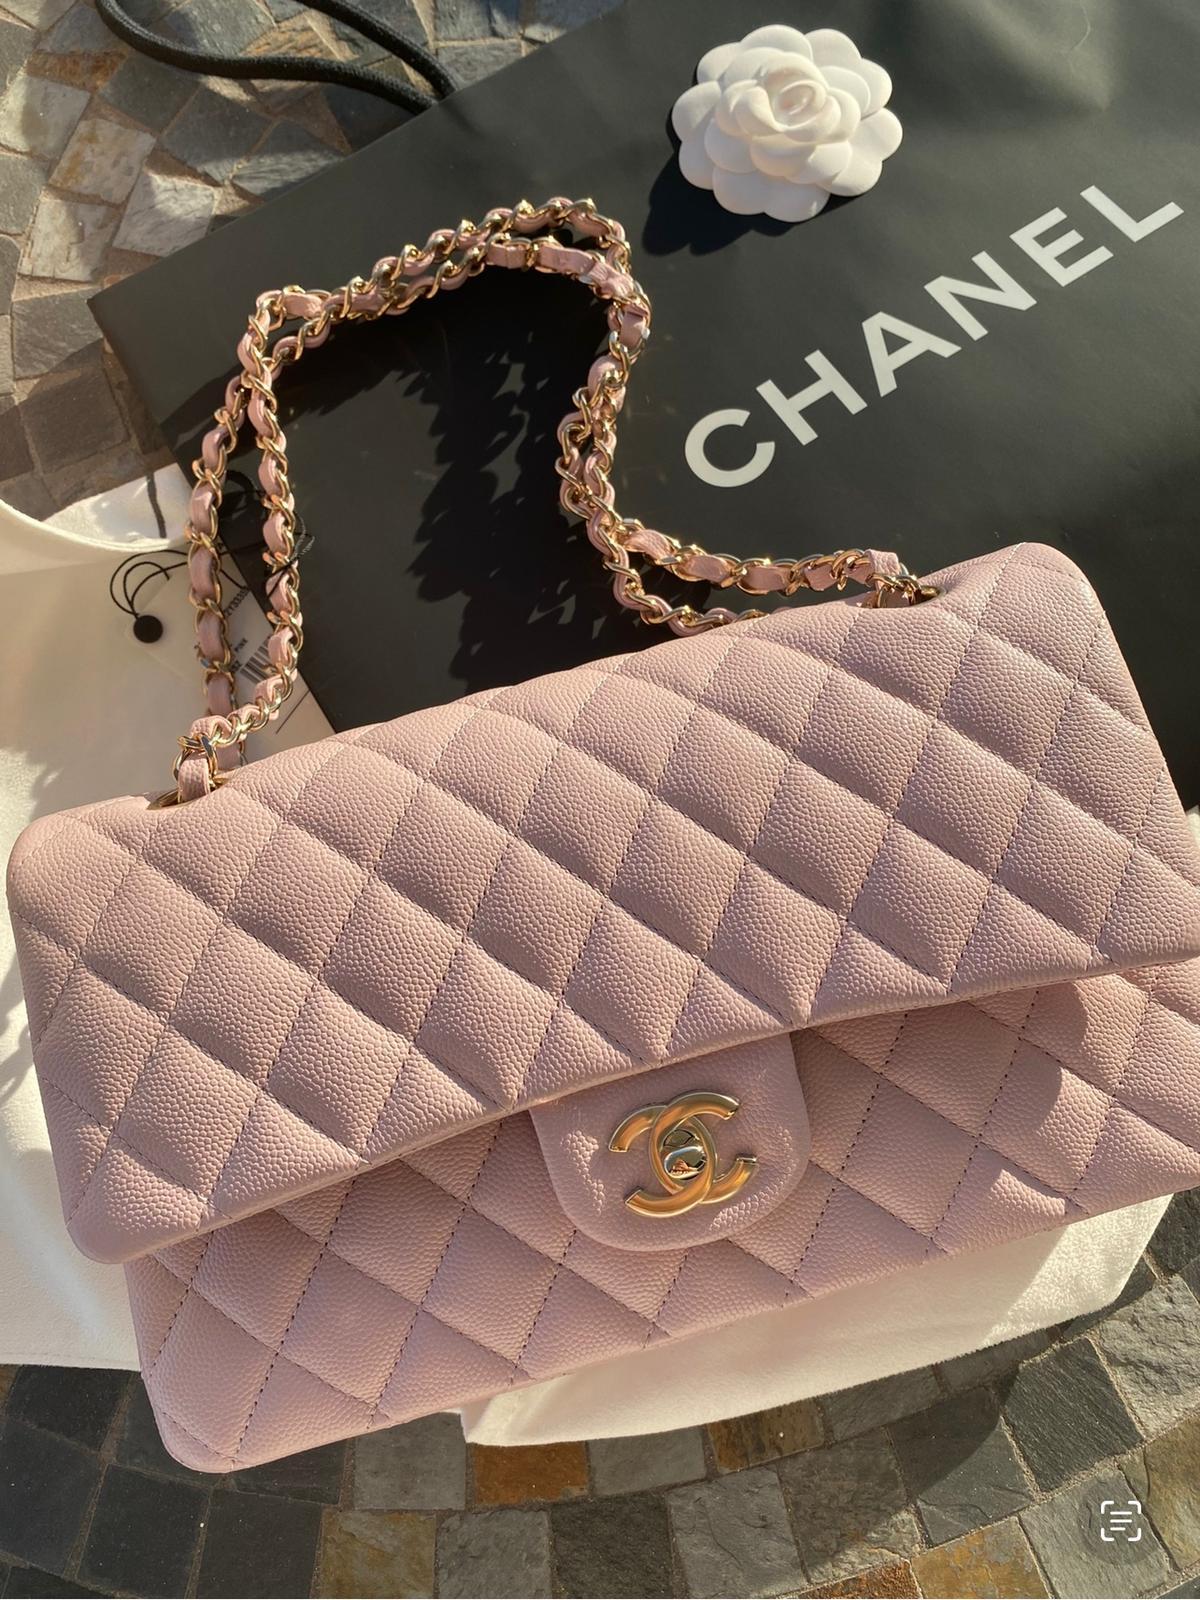 cheapest country to buy chanel in 2022